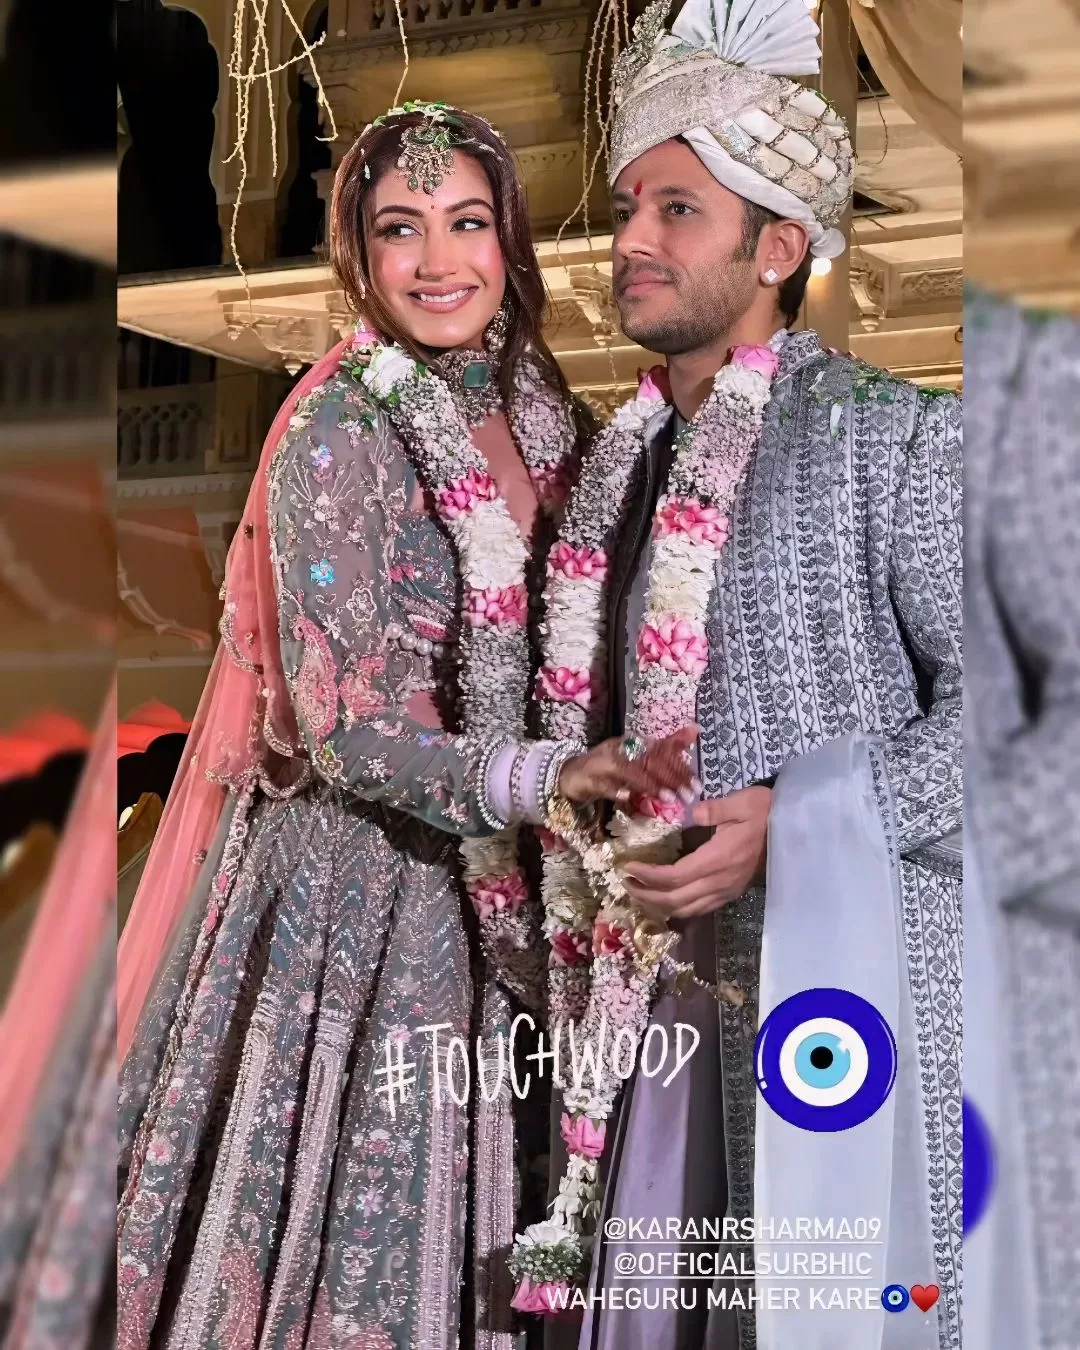 Surbhi Chandna and Karan Sharma Tie the Knot in a Spectacular Jaipur Wedding Ceremony